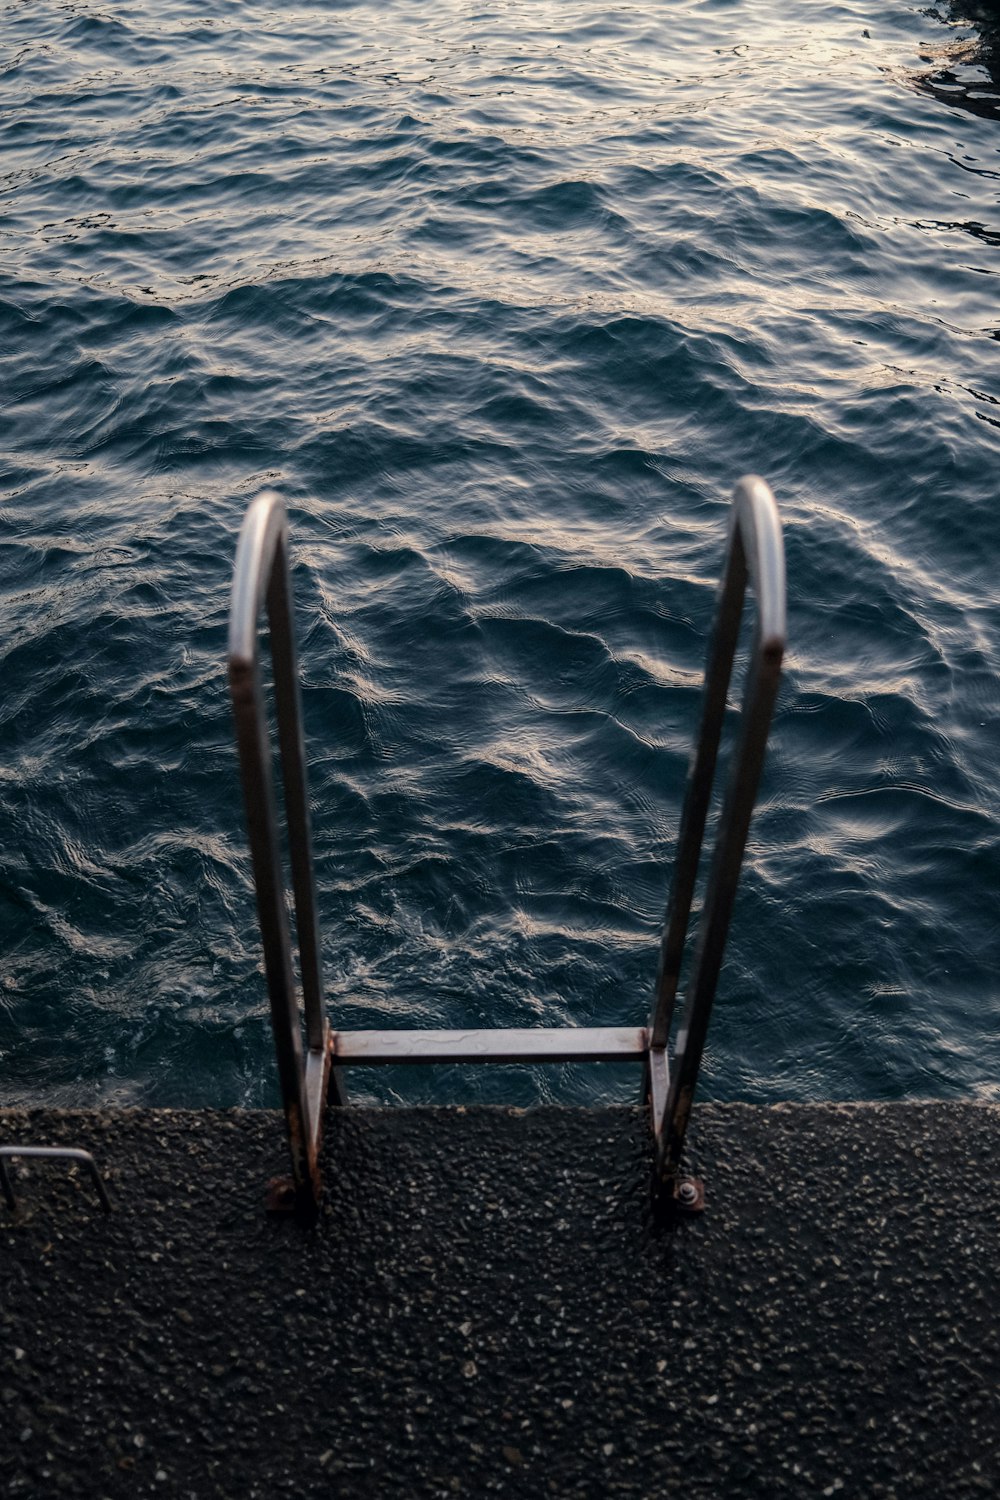 a pair of metal railings next to a body of water